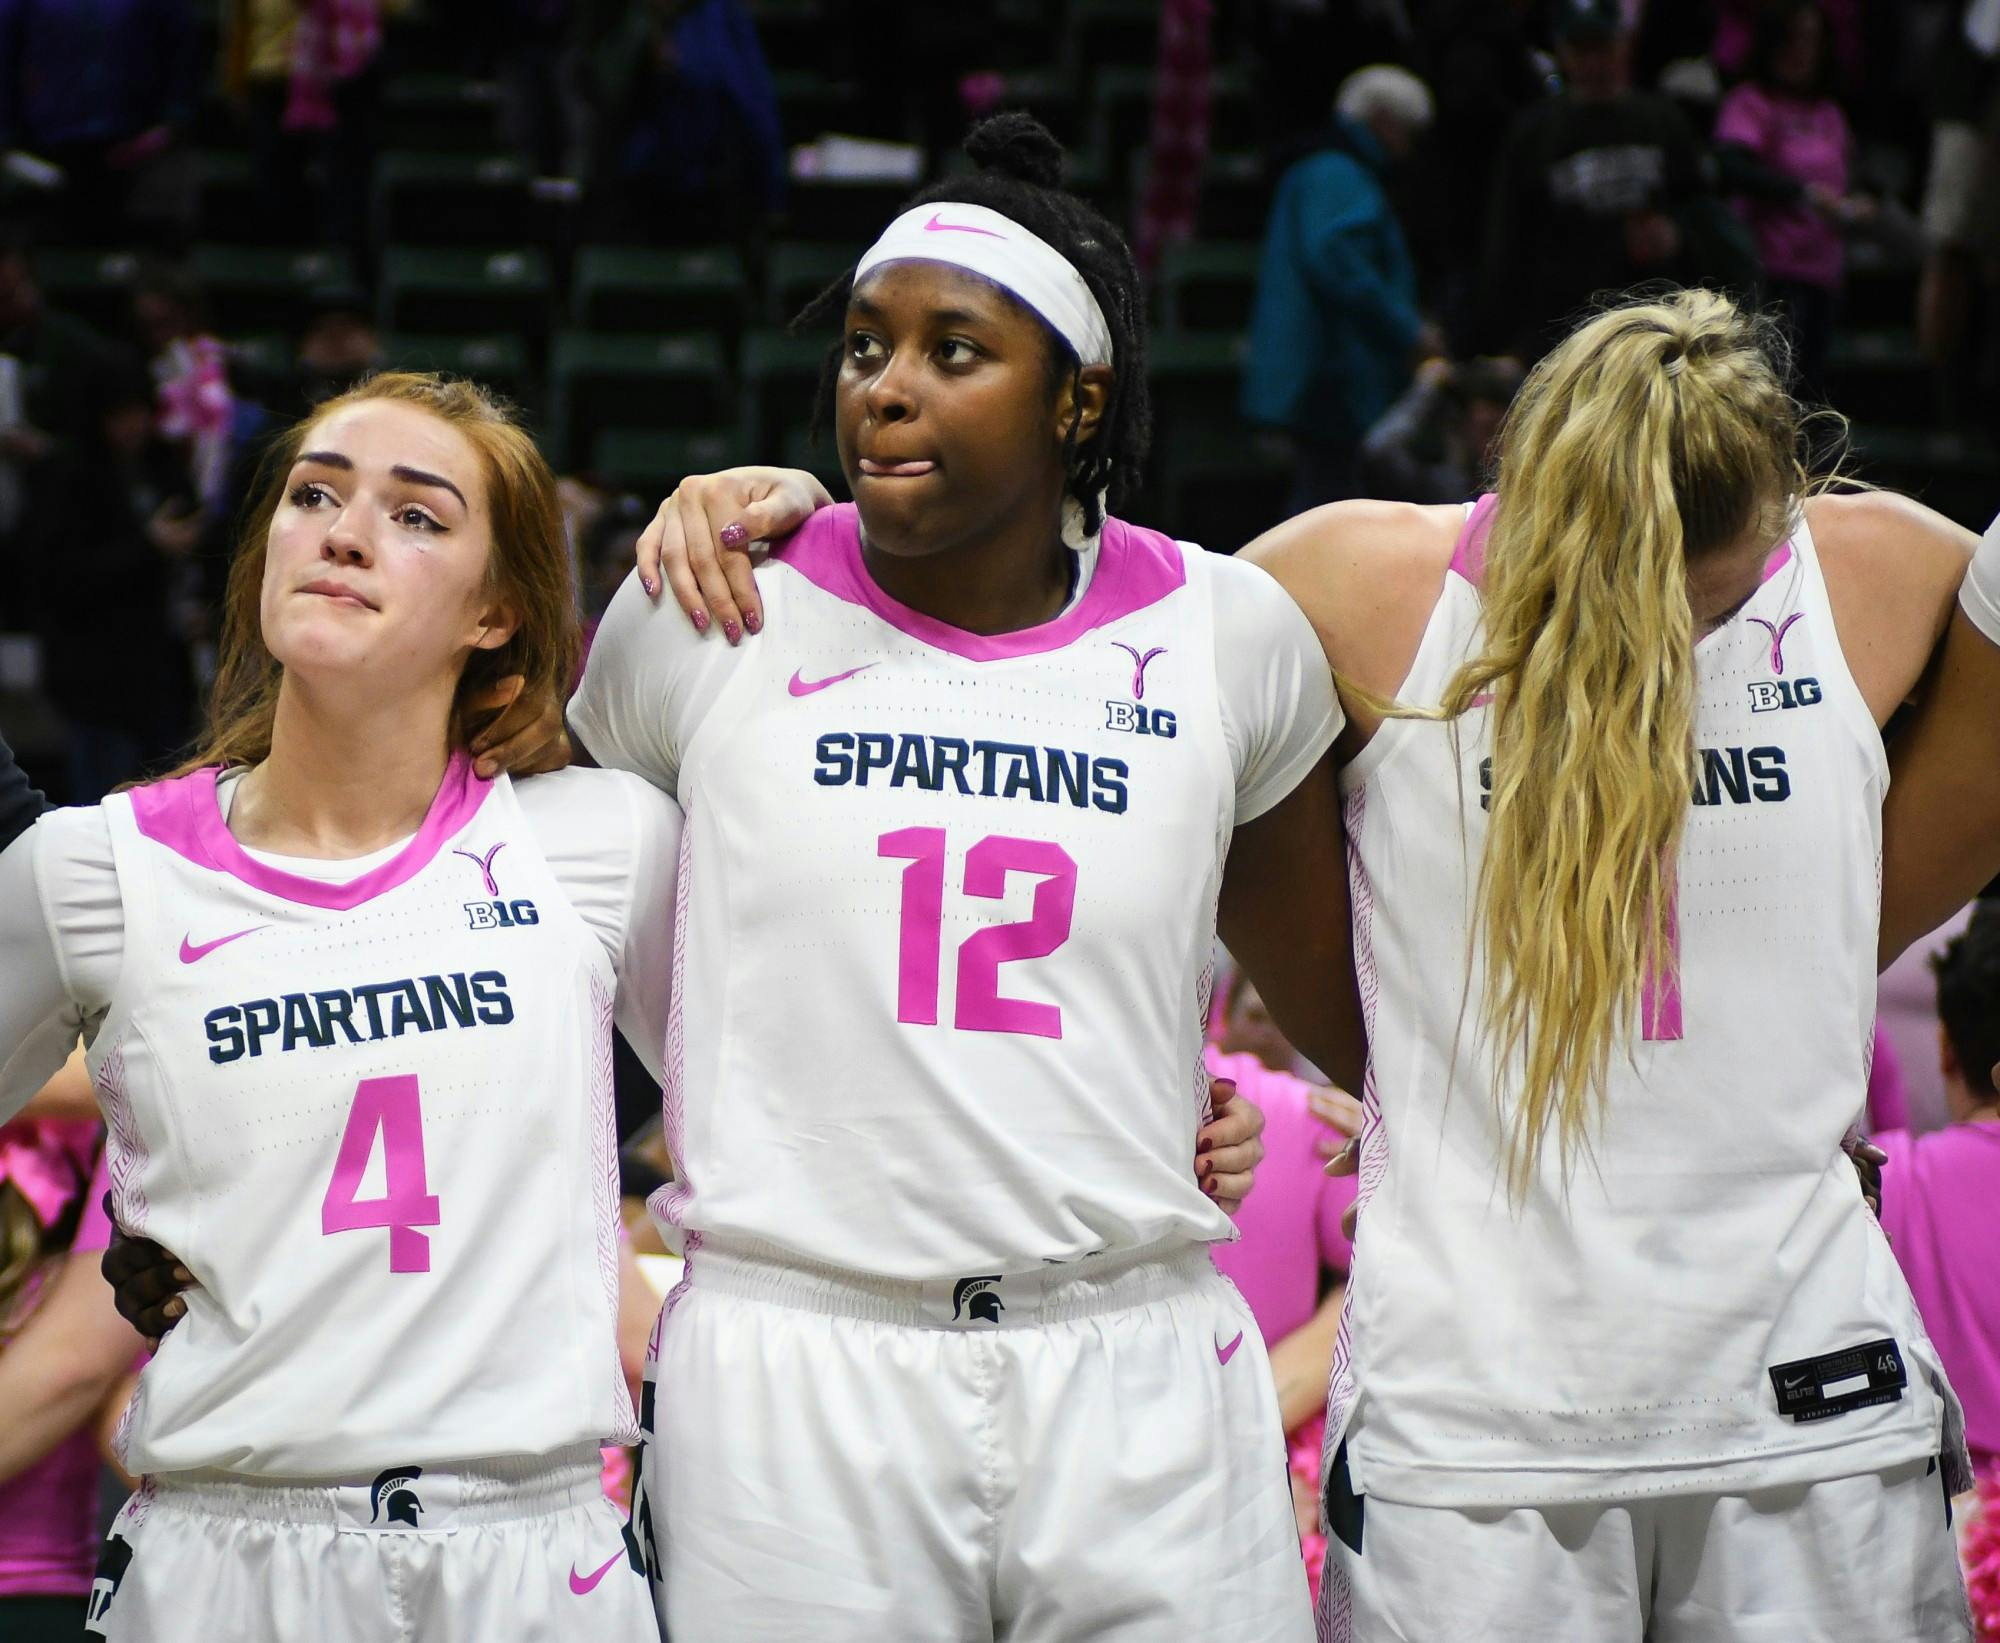 <p>Taryn McCutcheon (4), Nia Hollie (12), and Tory Ozment (1) following the women&#x27;s basketball game against Michigan at the Breslin Center on Feb. 23, 2020. The Spartans fell to the Wolverines, 65-57. </p>